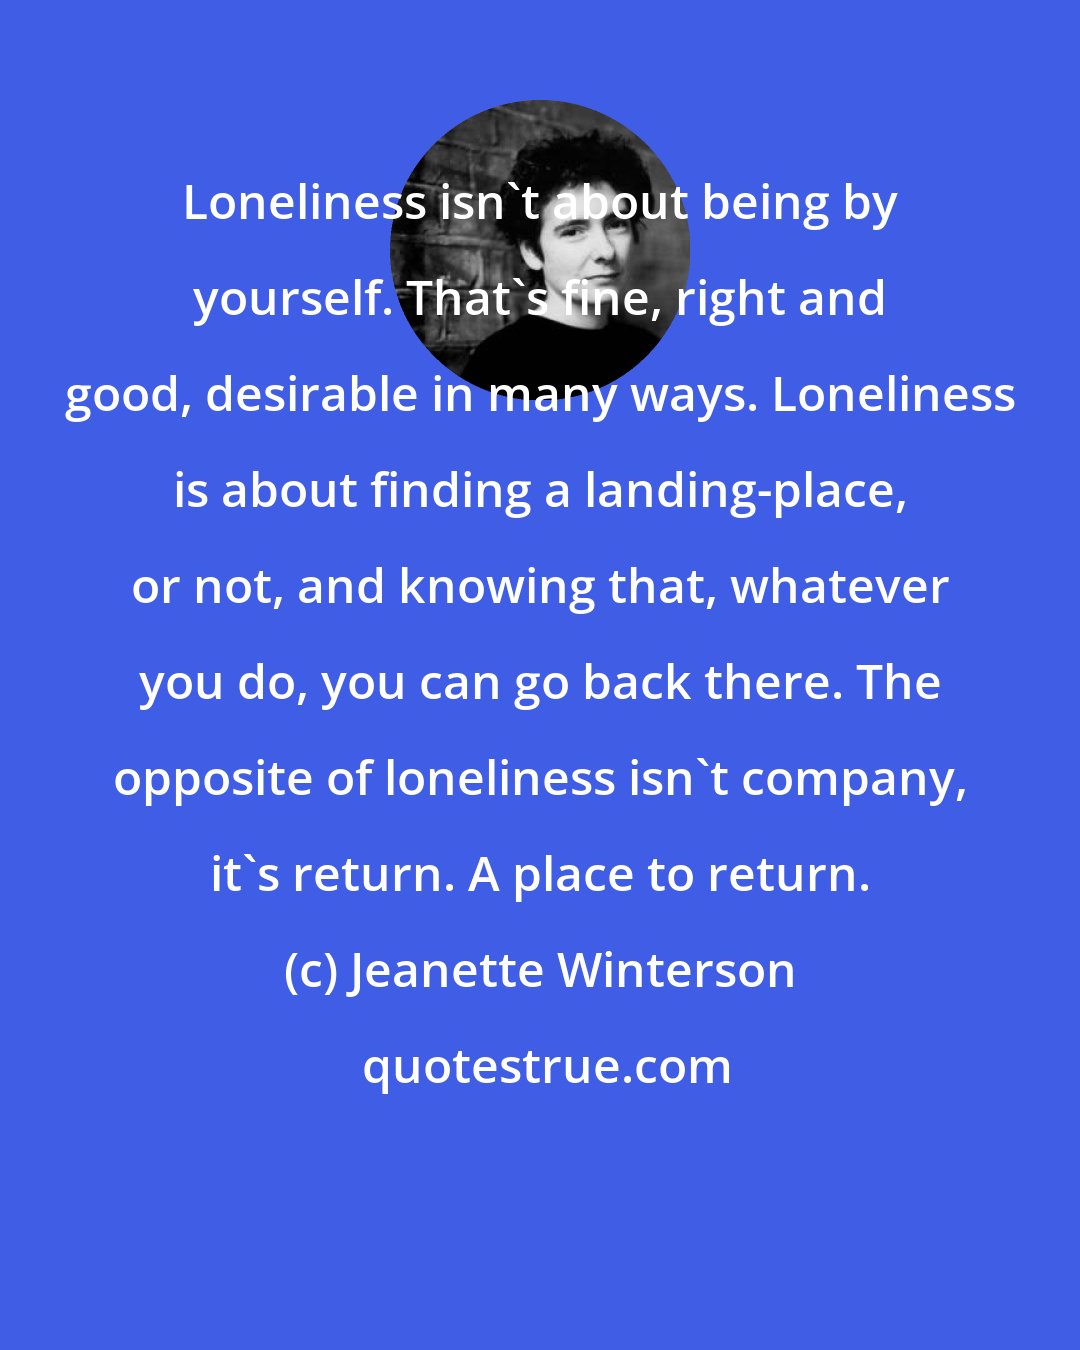 Jeanette Winterson: Loneliness isn't about being by yourself. That's fine, right and good, desirable in many ways. Loneliness is about finding a landing-place, or not, and knowing that, whatever you do, you can go back there. The opposite of loneliness isn't company, it's return. A place to return.